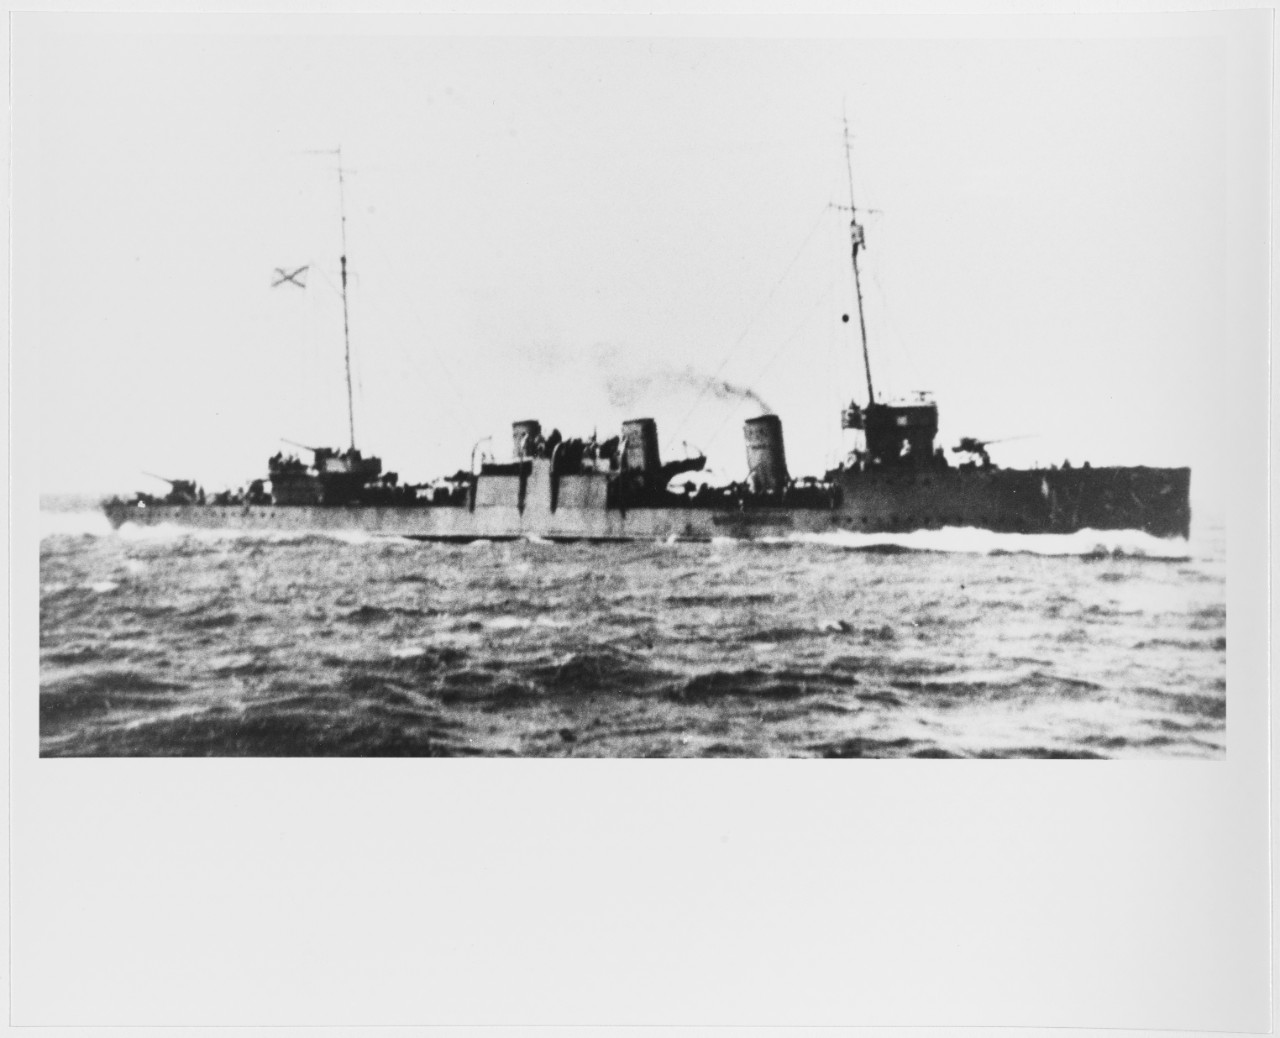 FIDONISI (Russian destroyer, 1916-1918)